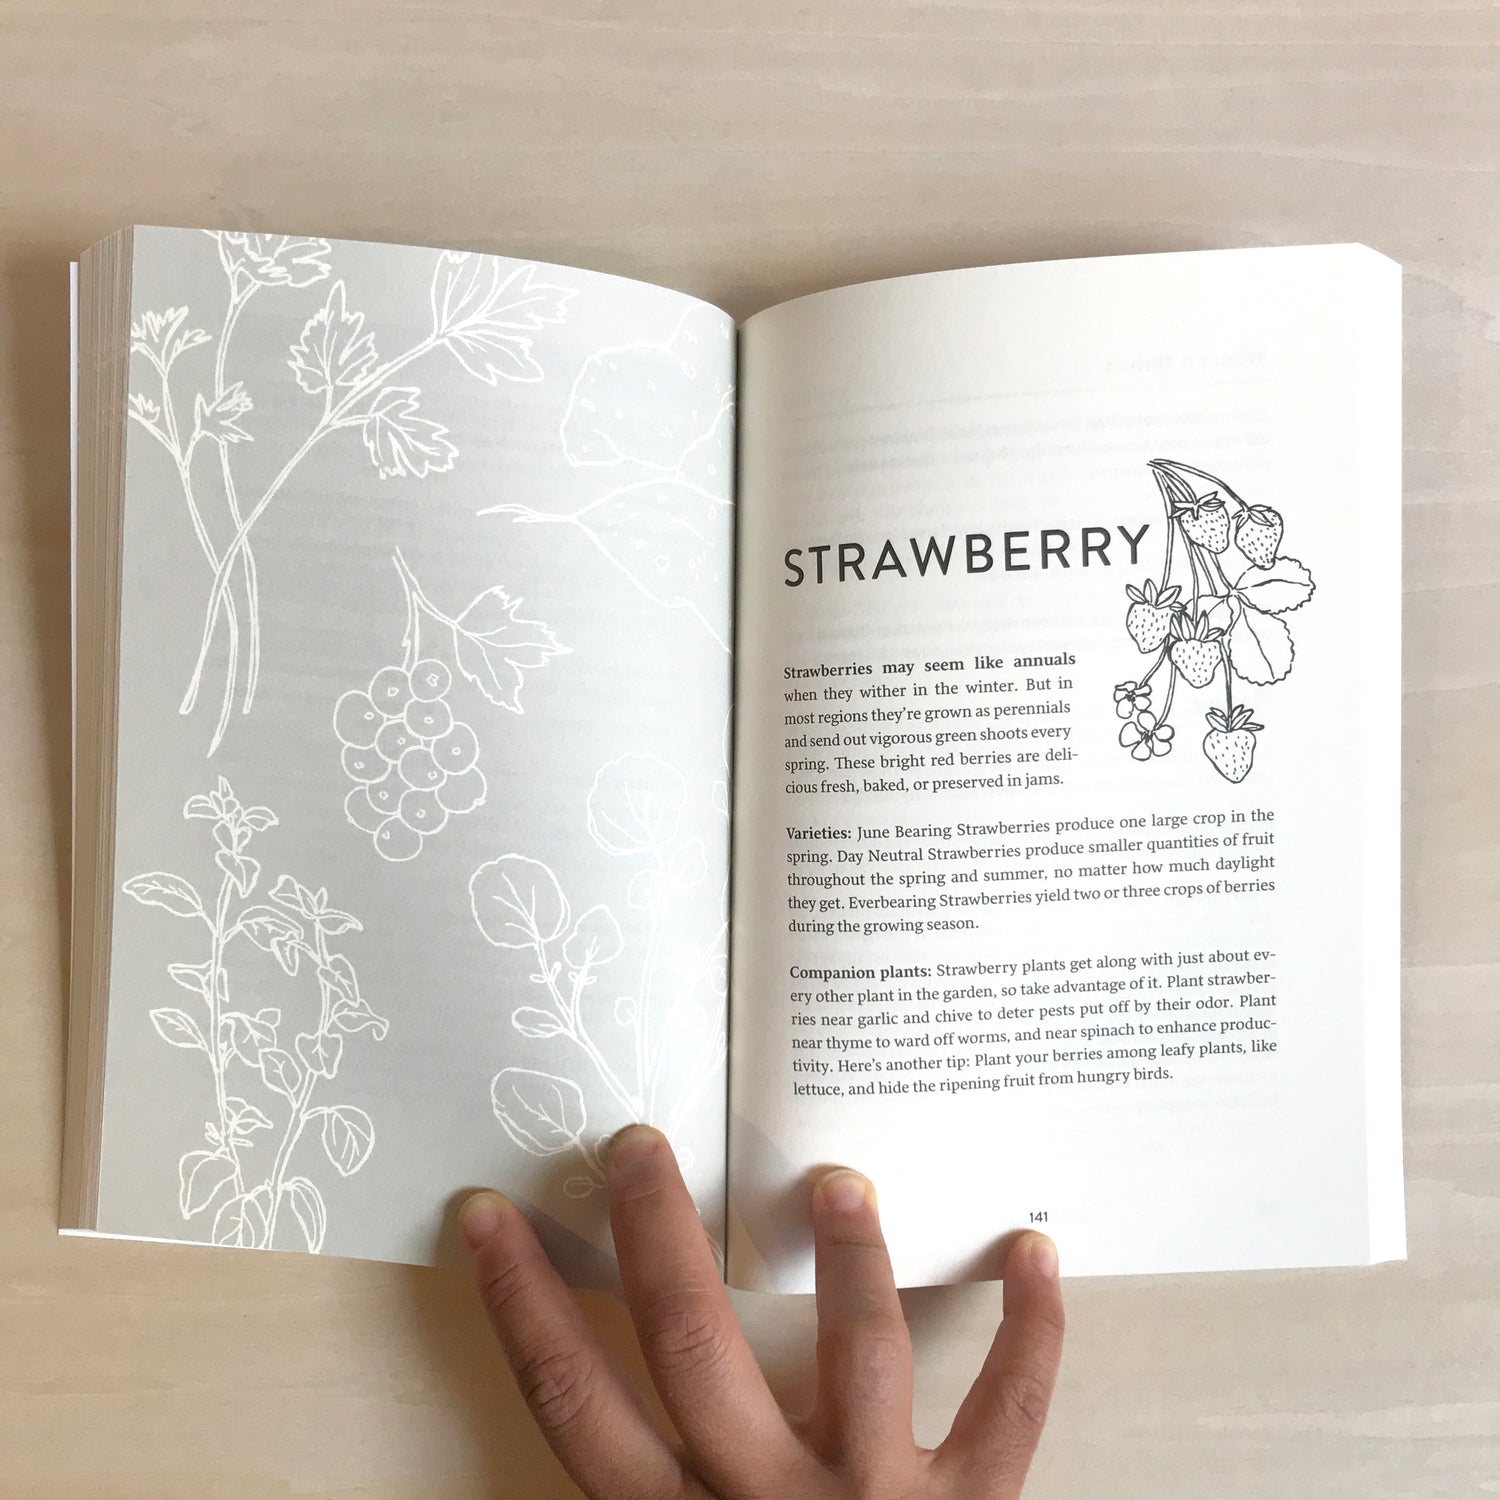 "Growing Perennial Foods" book open to "Strawberry" page featuring an illustrated cluster of strawberries and a description on the right page, light gray and white patterning of herbs on left page with a hand holding the spread open on light wood desk